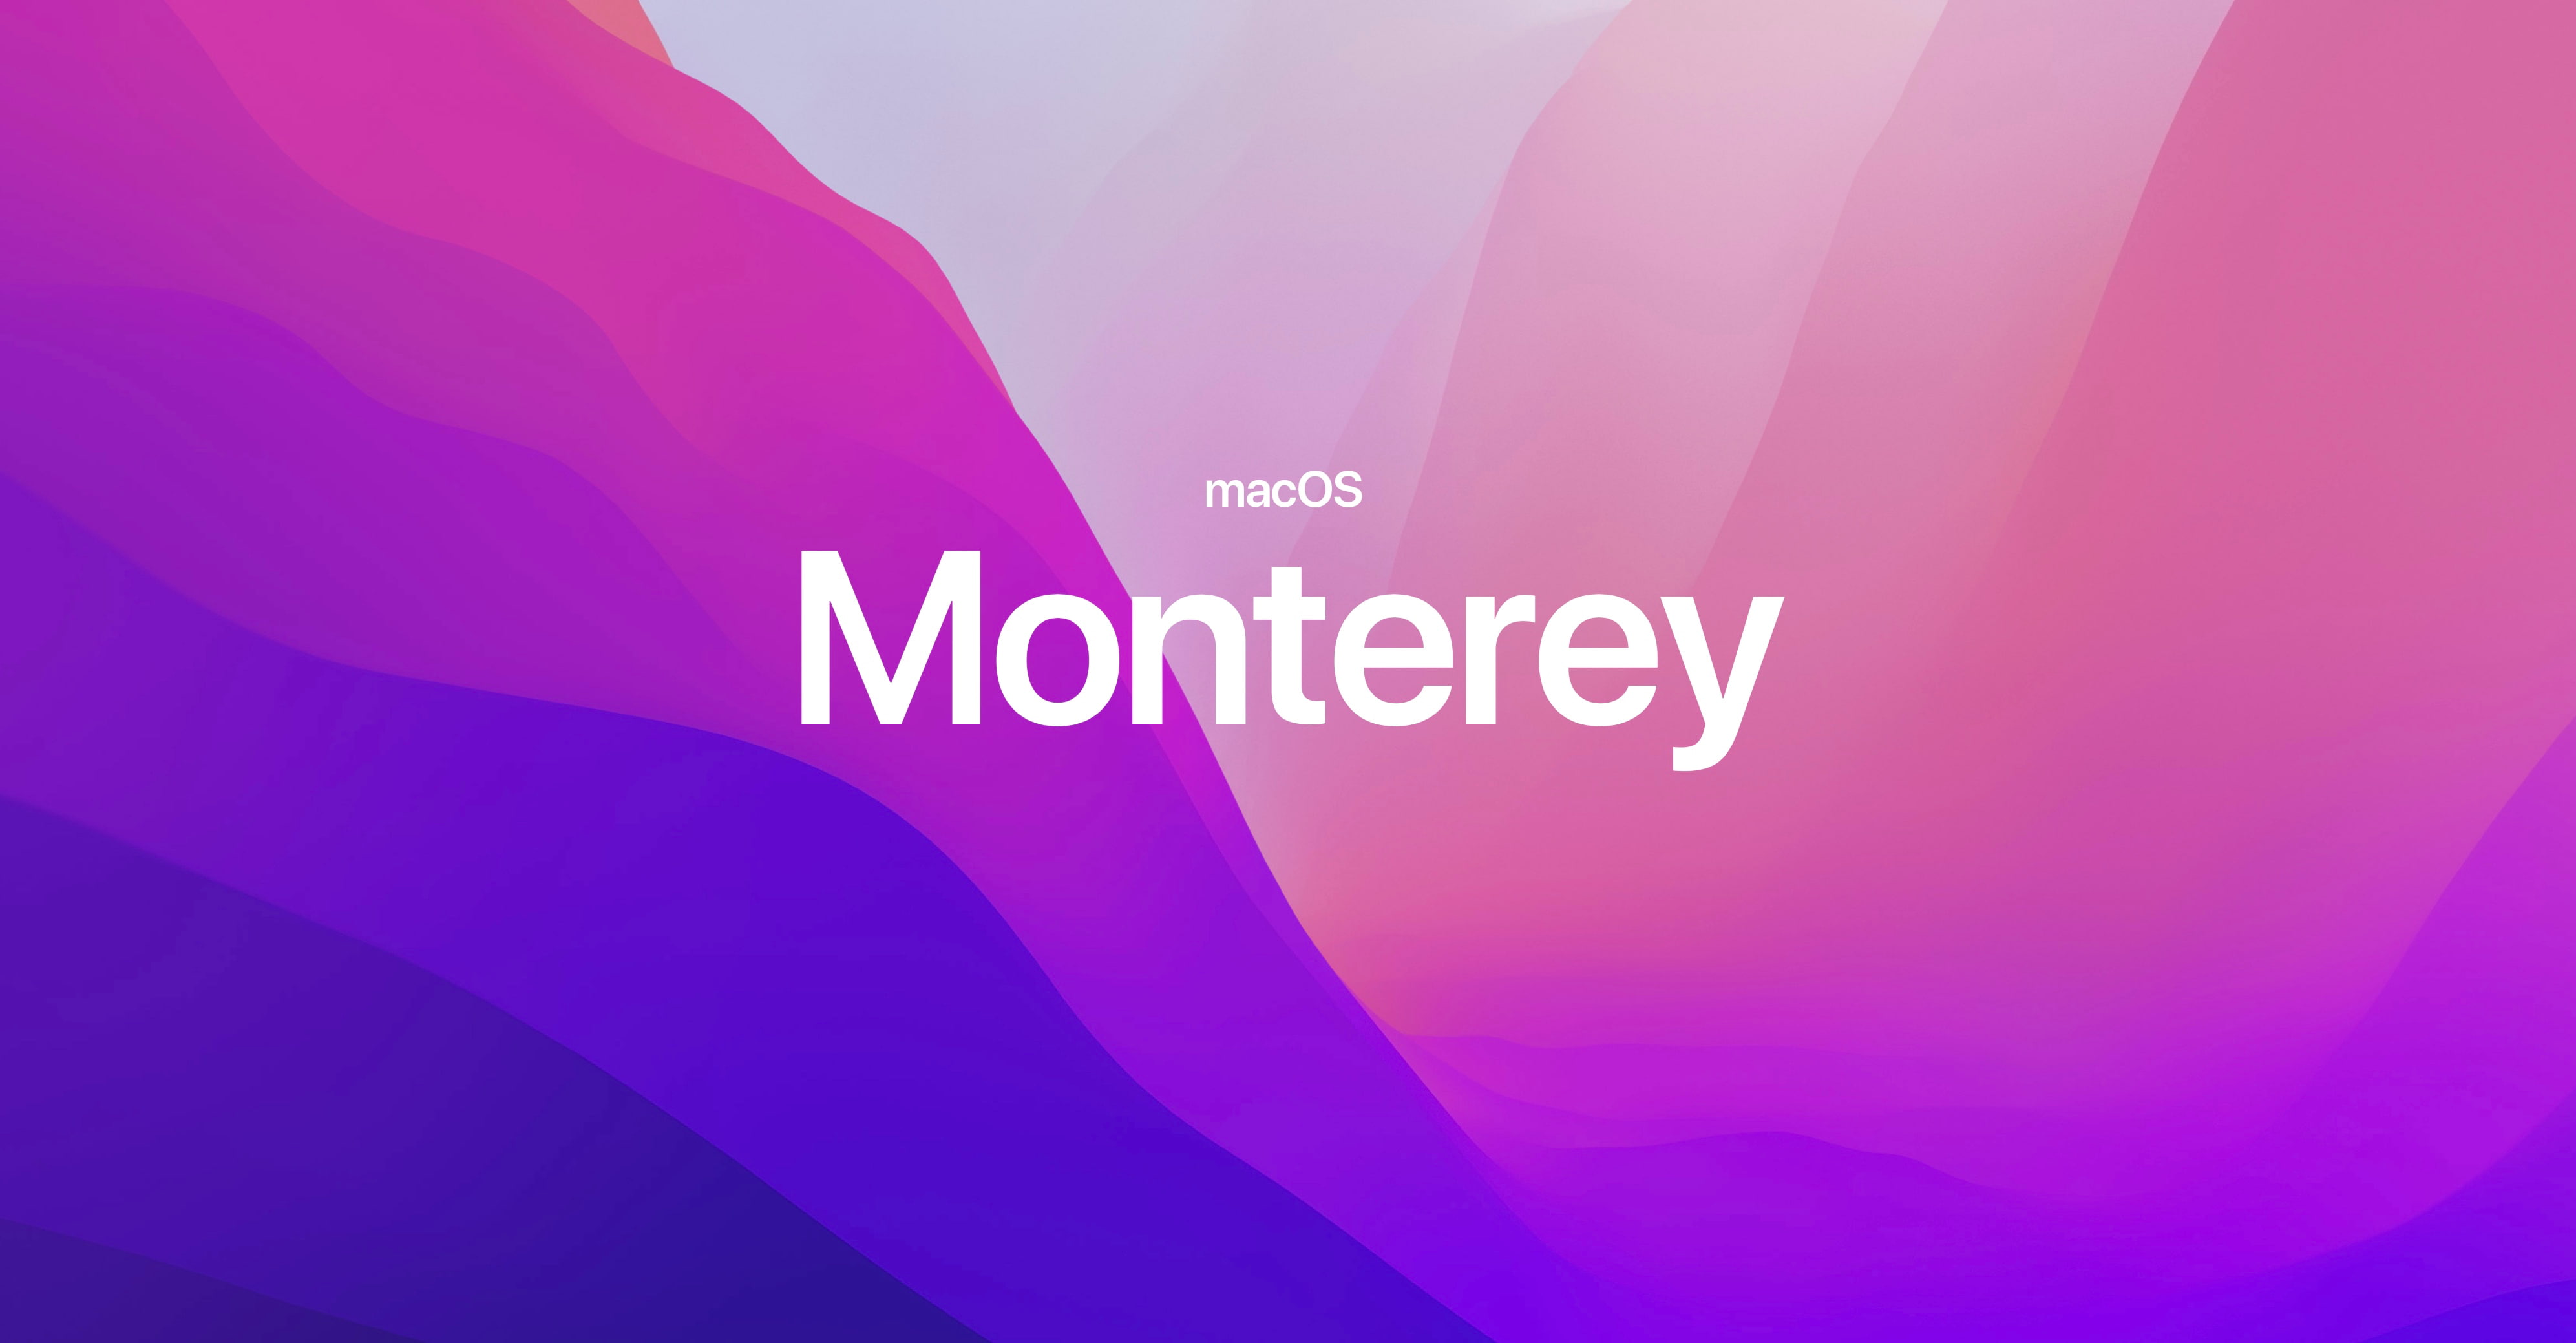 "macOS Monterey" written on the official macOS Monterey wallpaper